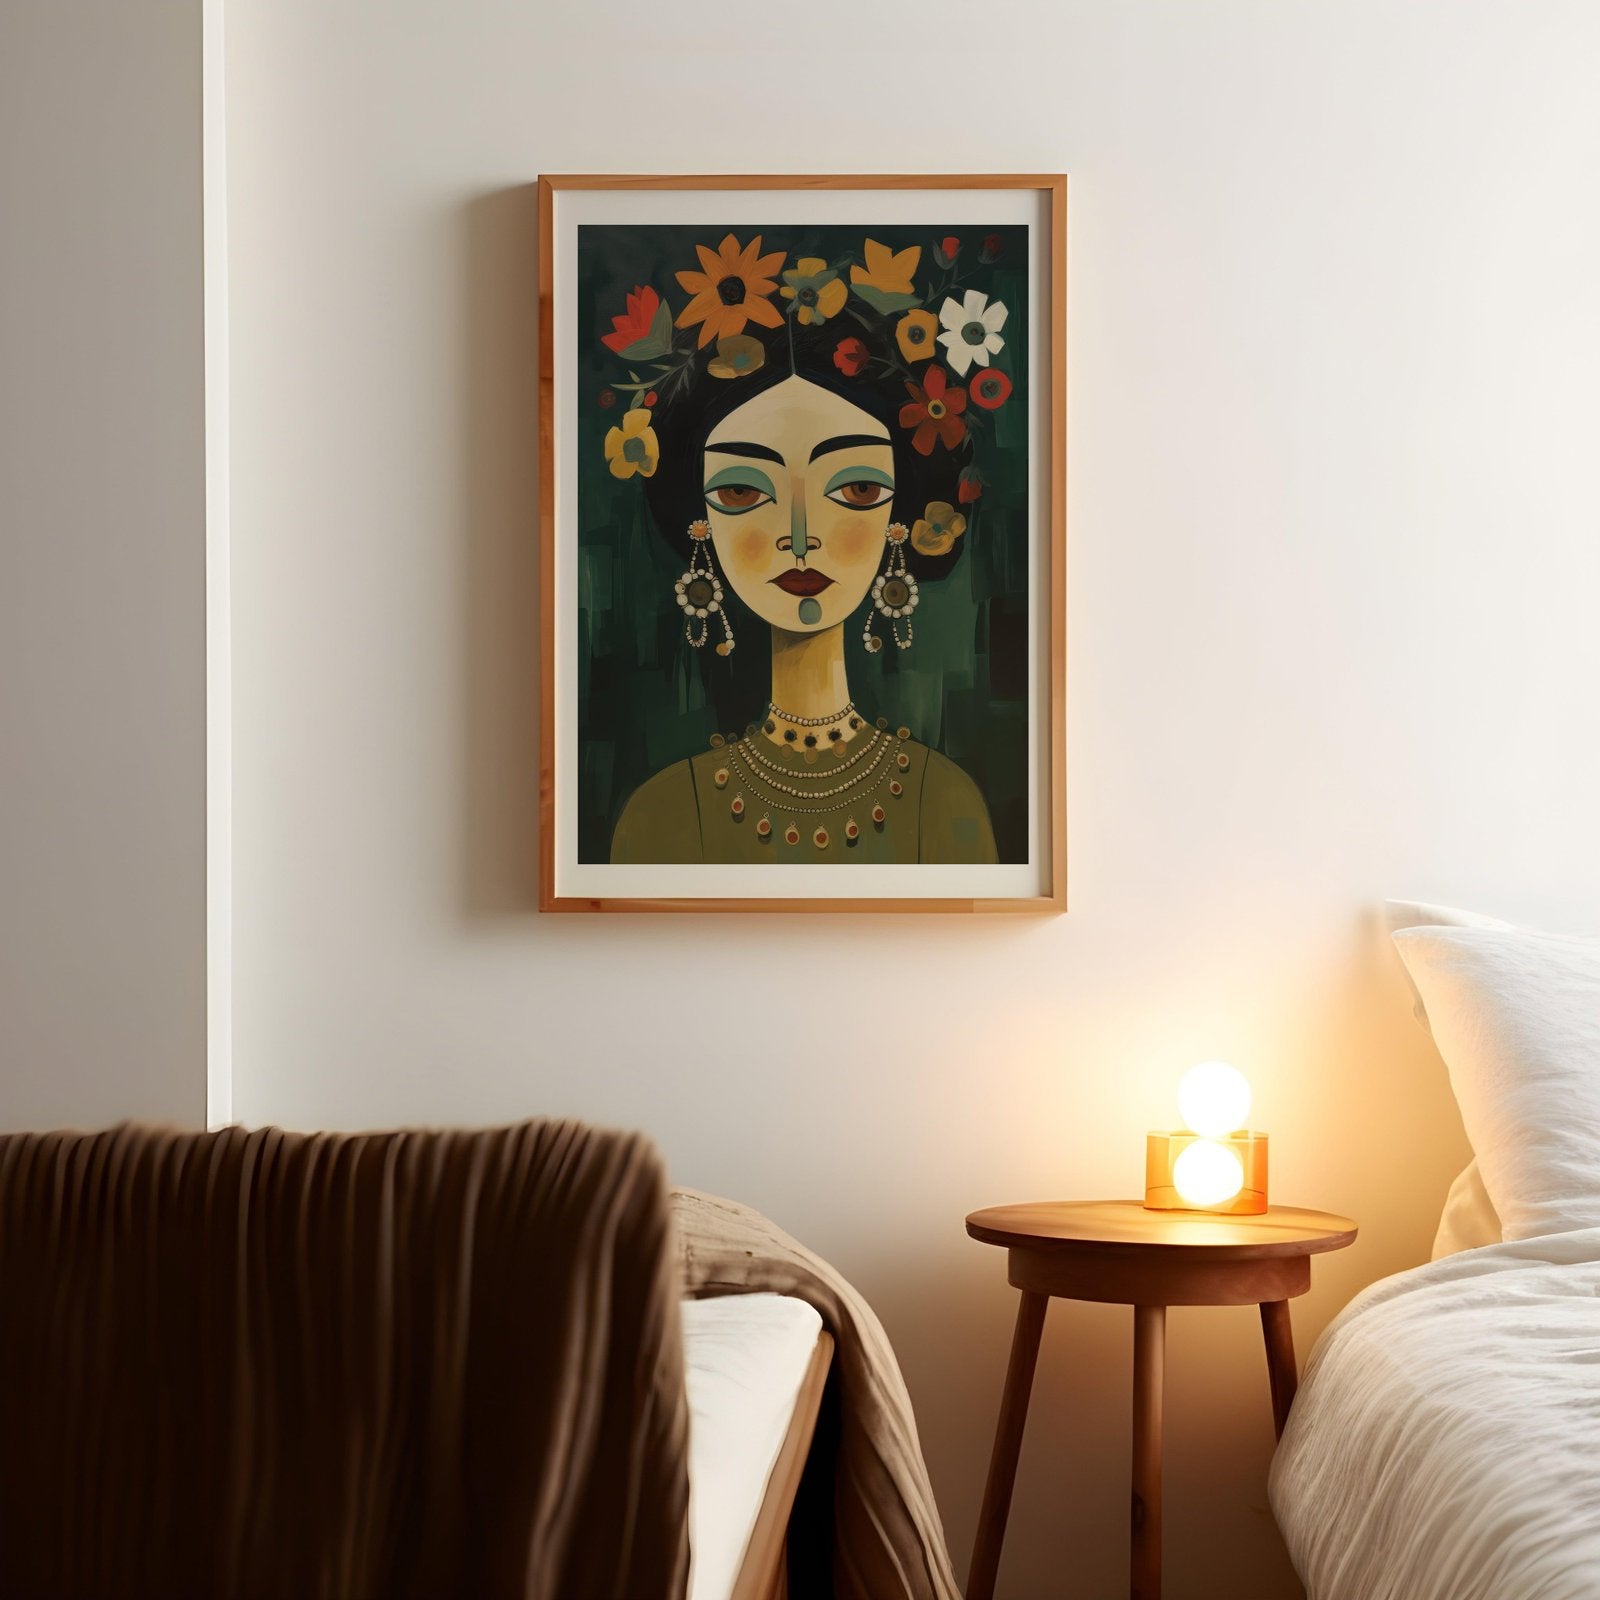 a picture of a woman with flowers on her head hangs above a bed